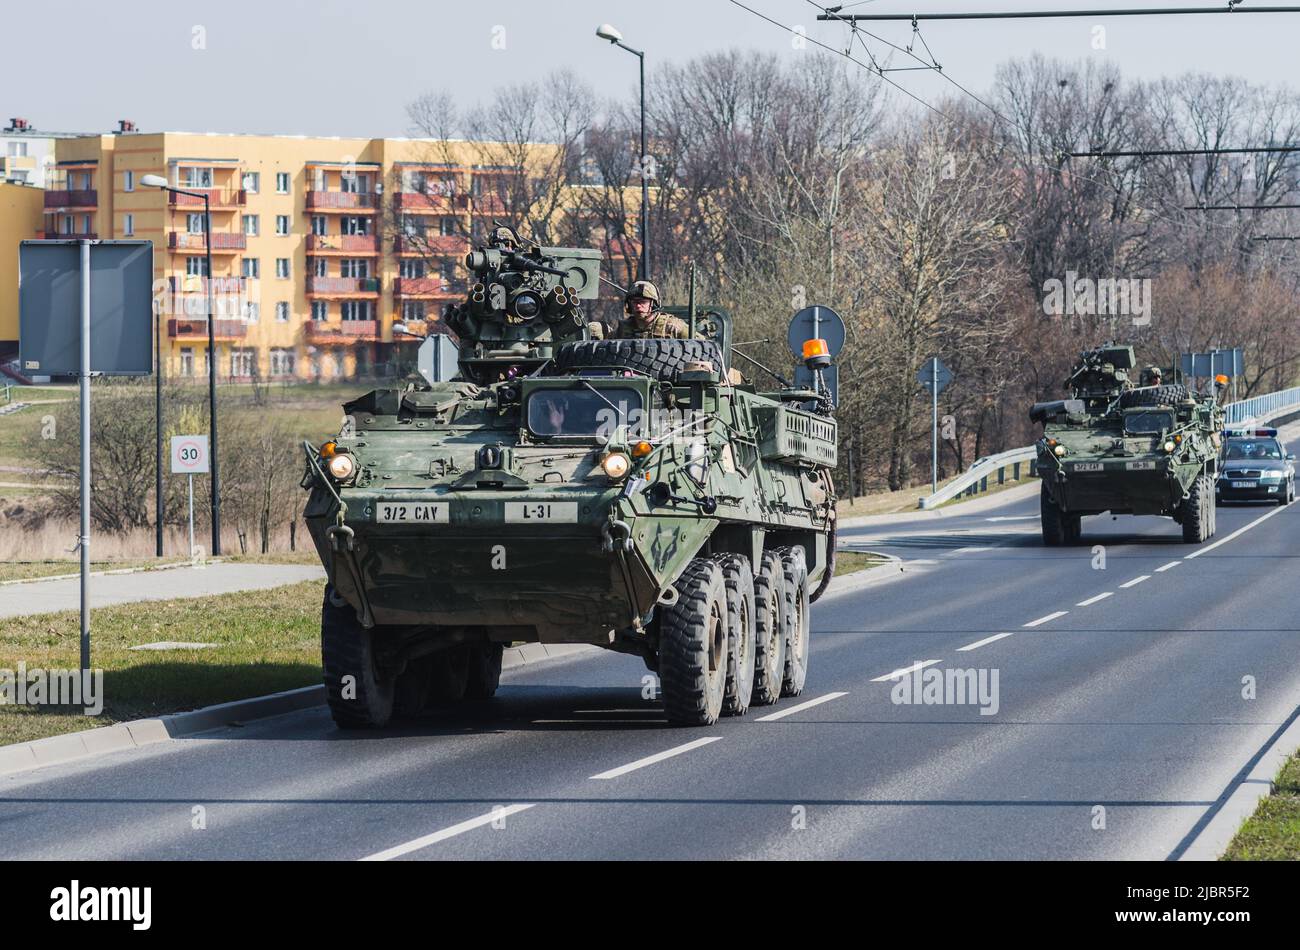 Lublin, Poland - March 25, 2015: United States Army vehicle (Armored Personnel Carrier) Stryker passing city streets Stock Photo